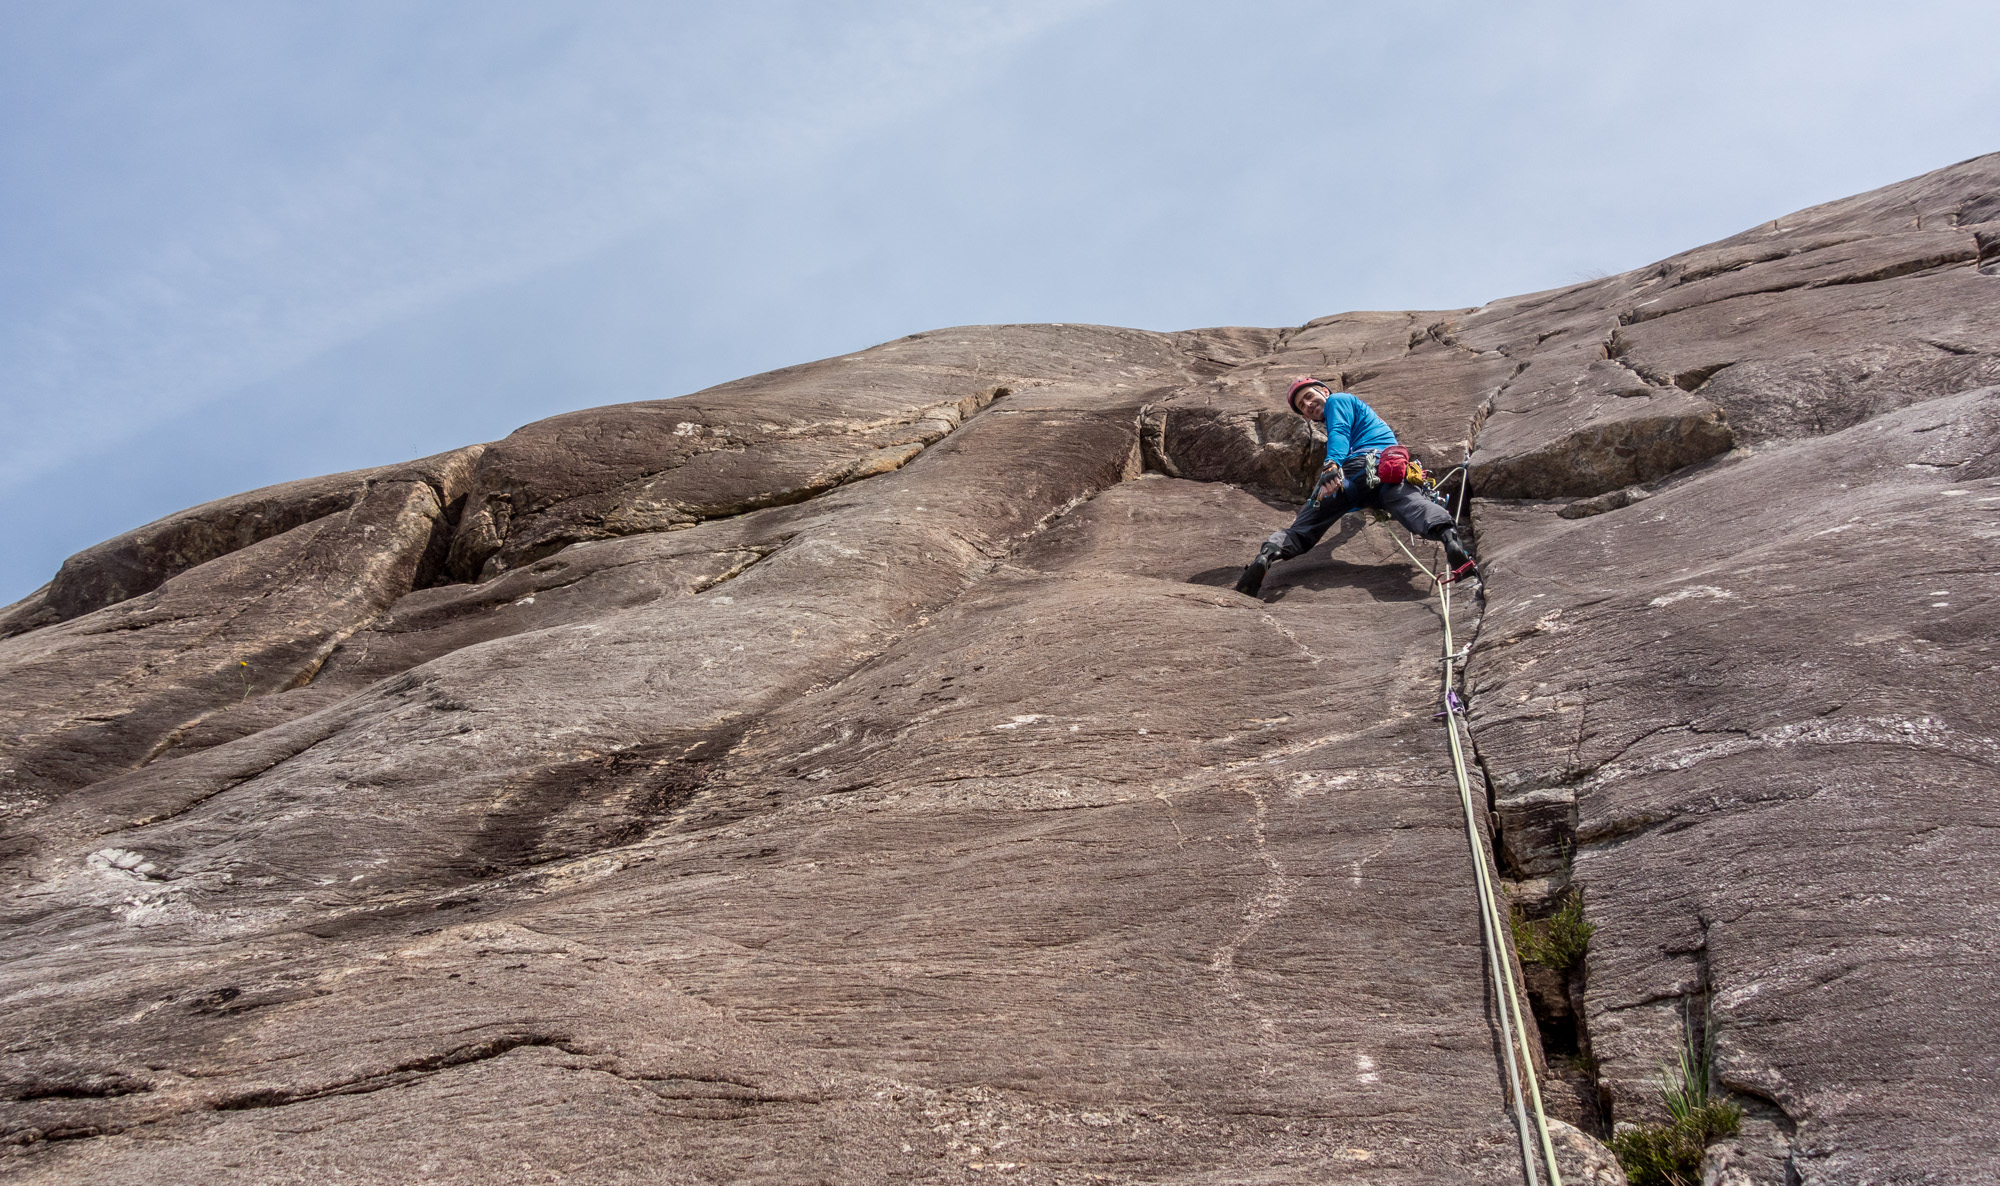 Immaculate rock and perfect cracks on the second pitch of Route Two